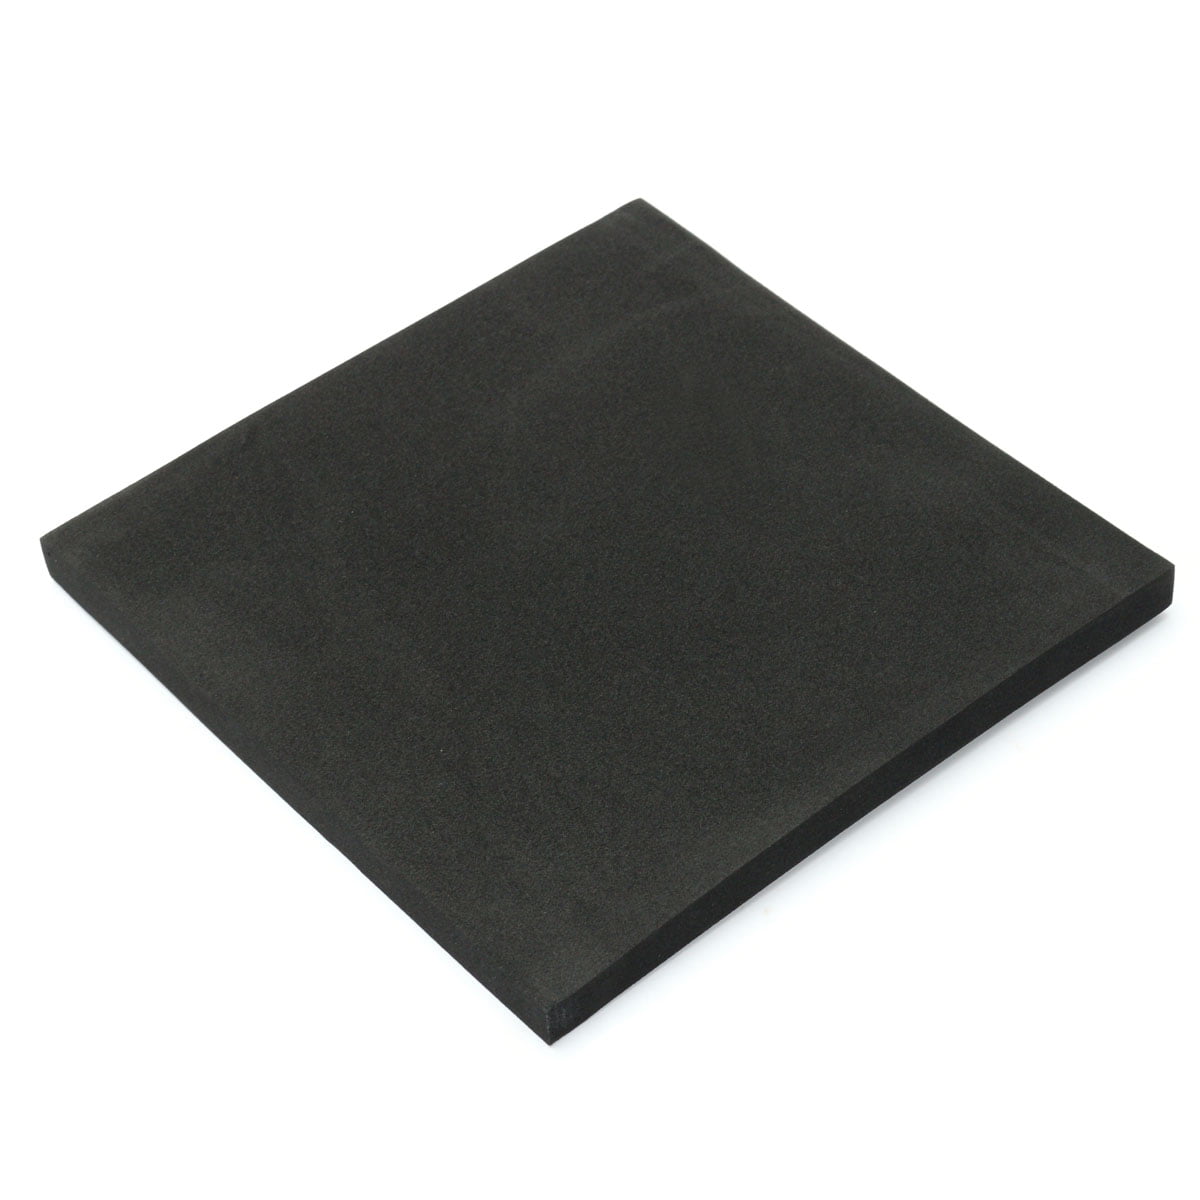 HD CONDUCTIVE PIN INSERTION FOAM SHEET 6MMx200MMx150MM FOR IC PROTECTION